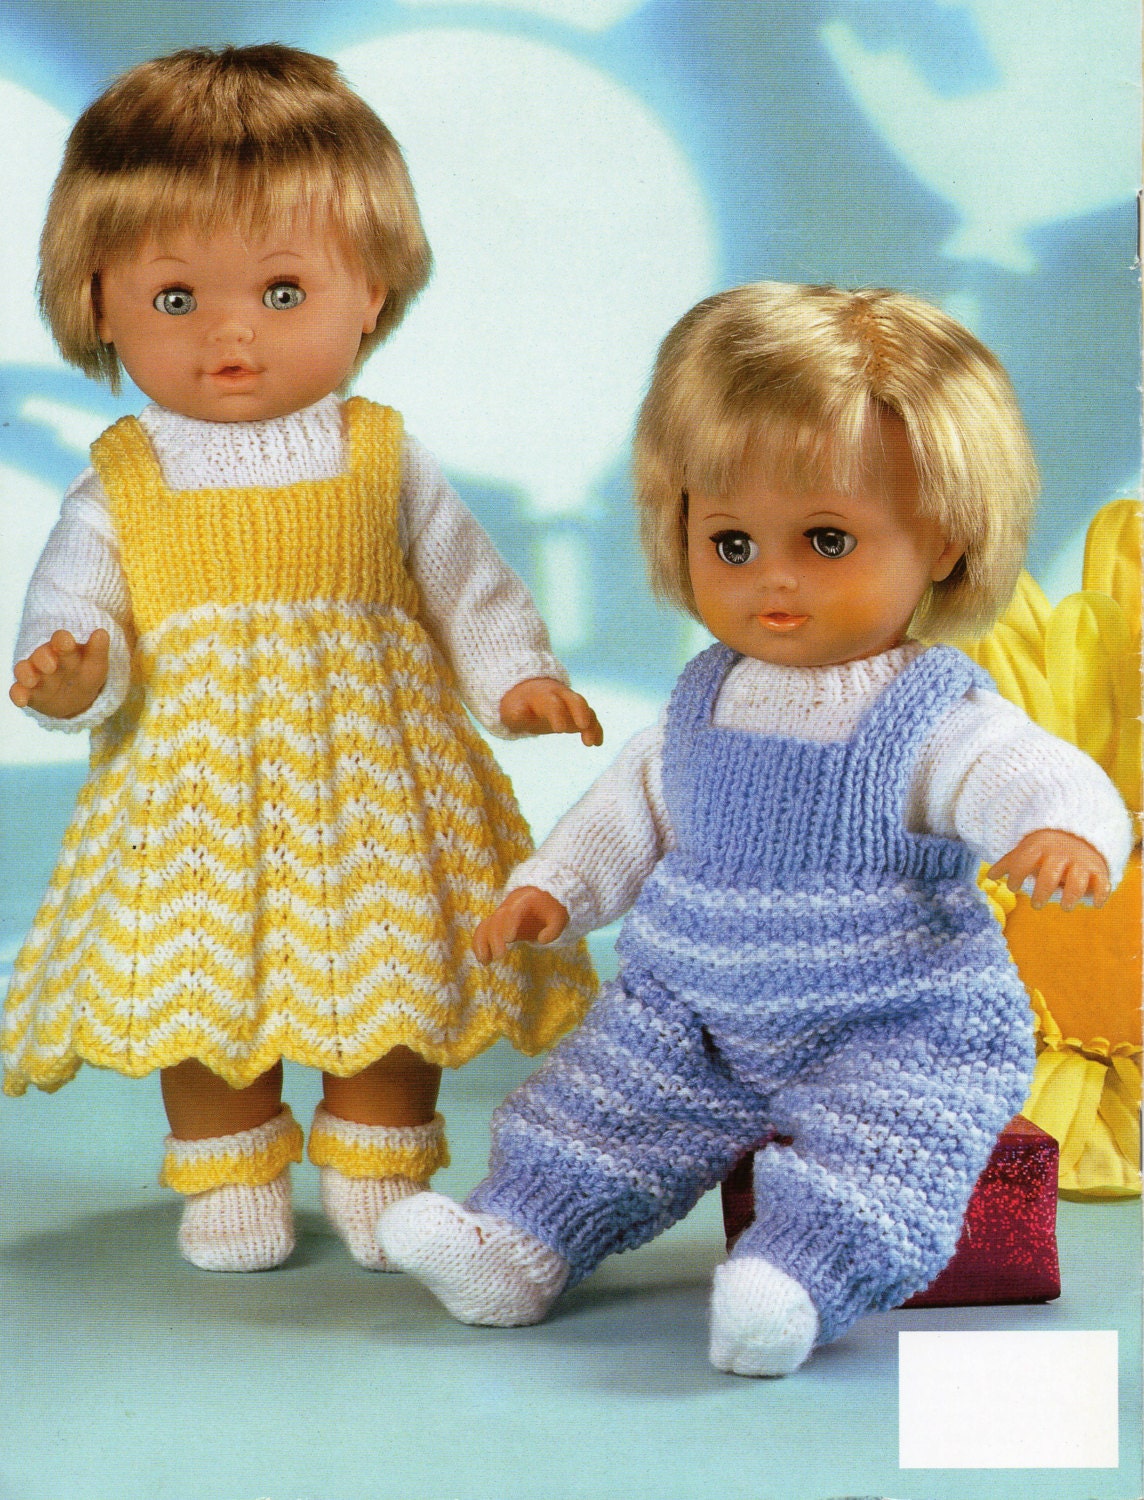 Knitting Patterns For 12 15 Inch Dolls Free Pin on baby knit 8.0